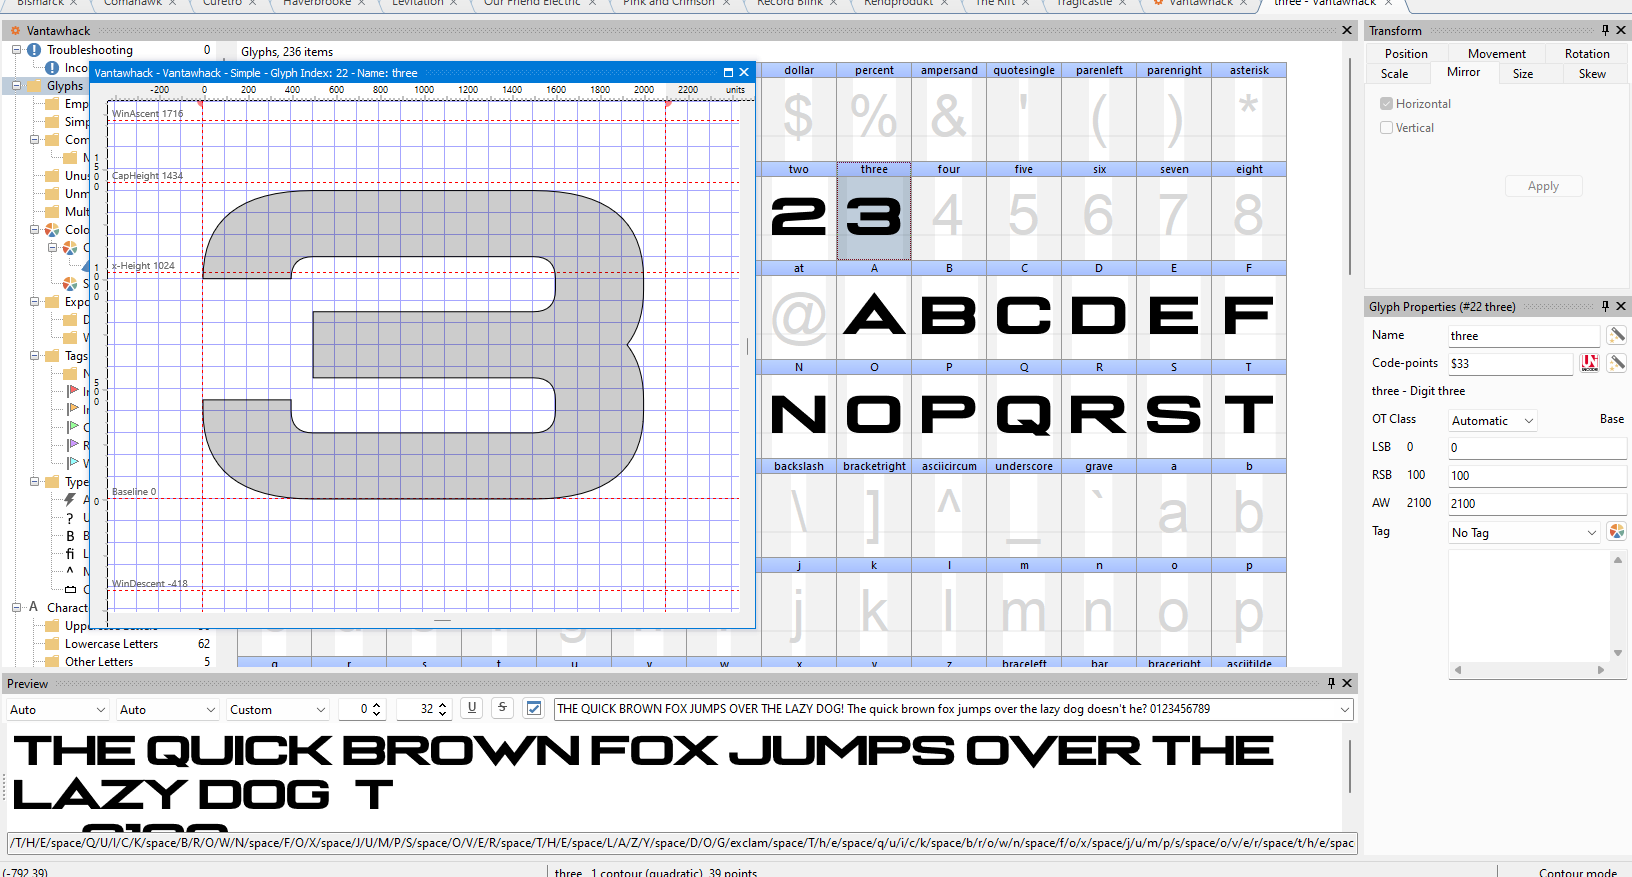 FC14 undocked font editor.png